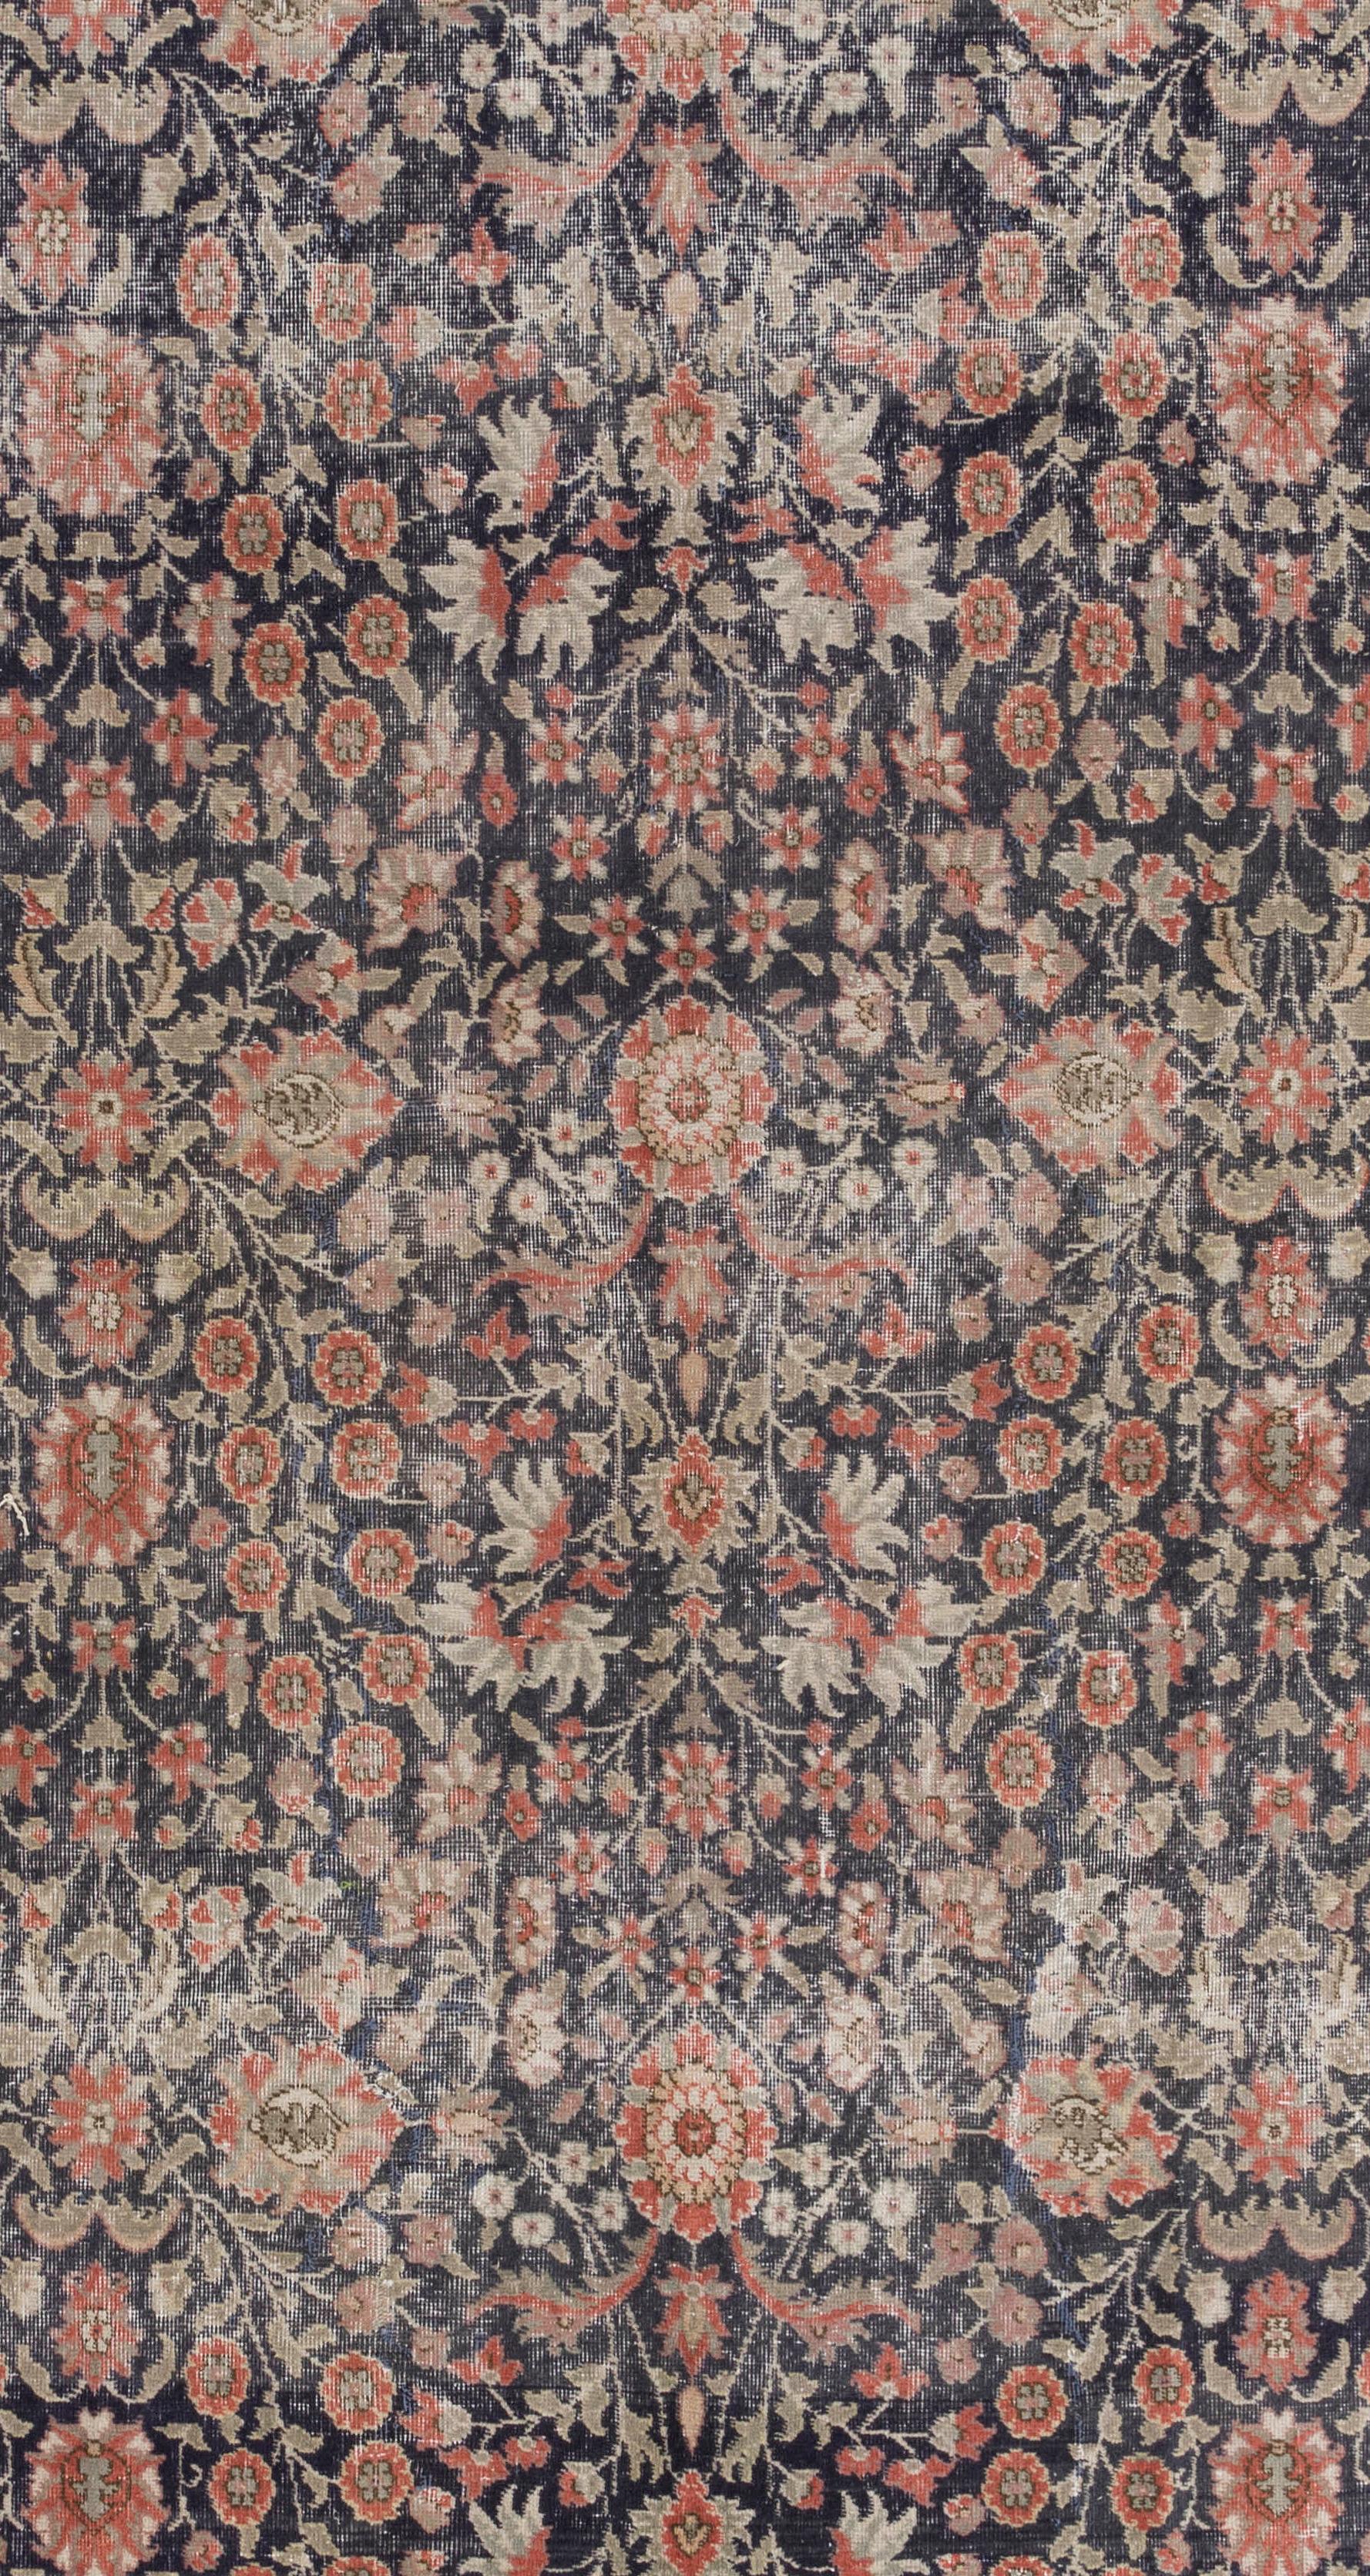 A vintage hand knotted Turkish rug from the 1960s featuring well-drawn and varied floral vines gathering around a few larger-sized rosettes in madder red and olive green with touches of light fawn across the black field. The cream border is filled